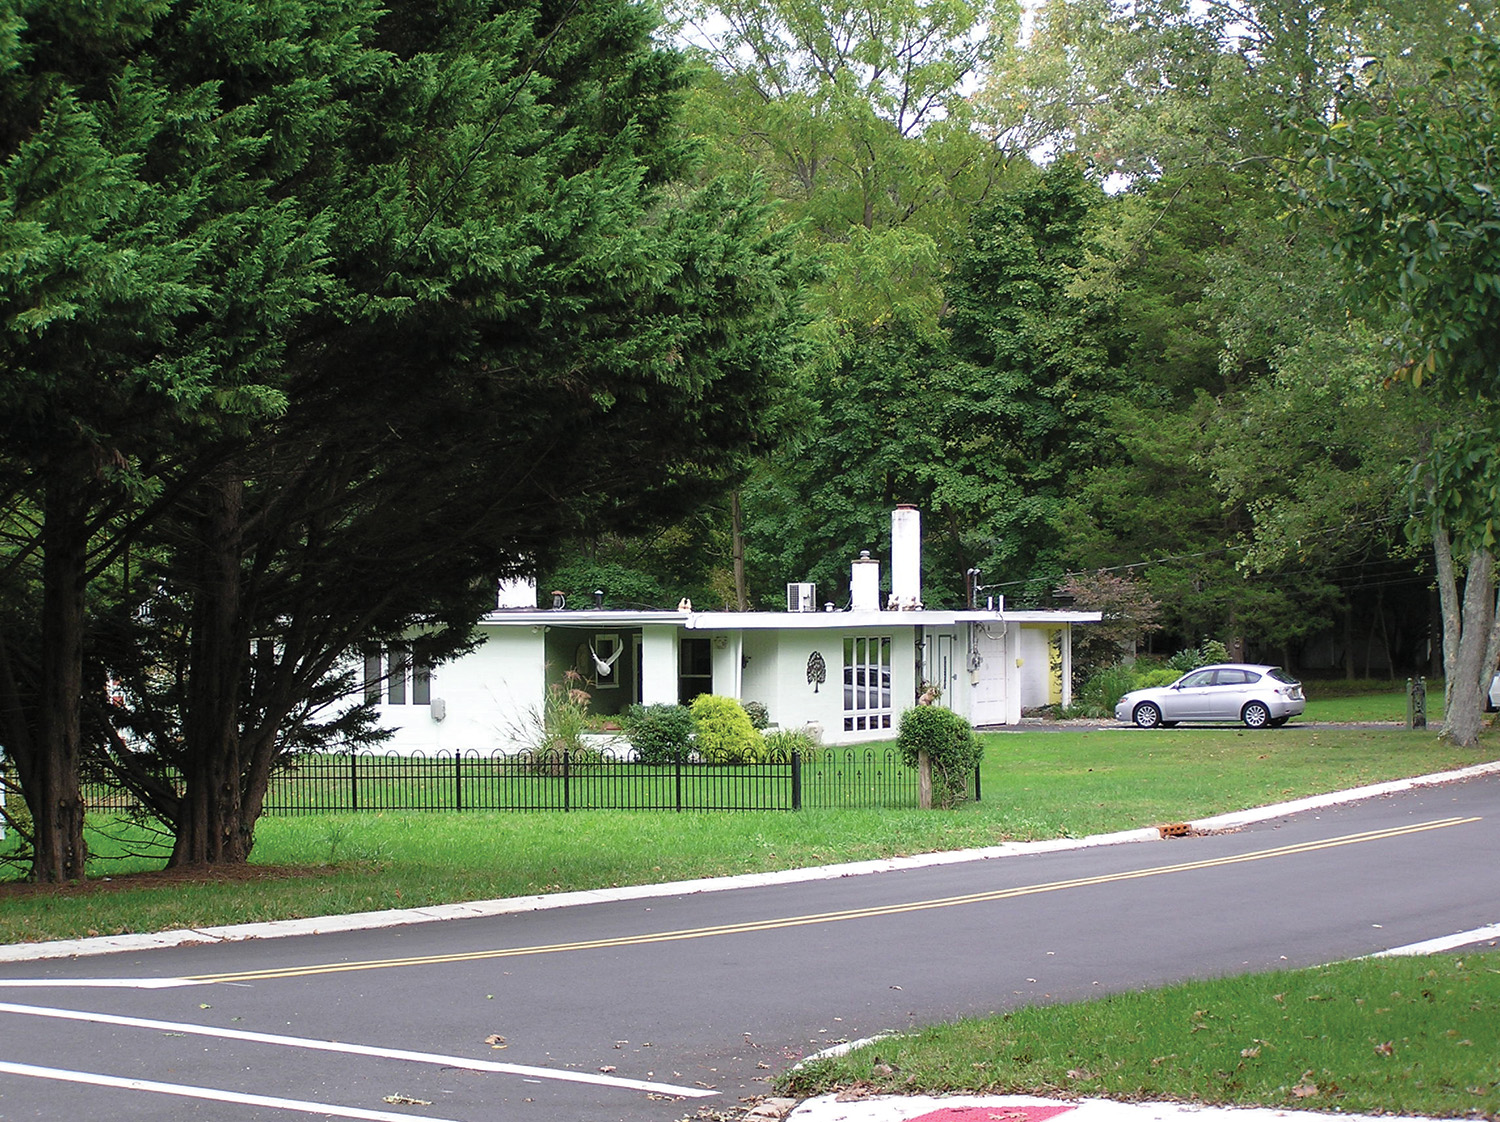 A white single-story house surrounded by trees, with a car parked in the driveway.